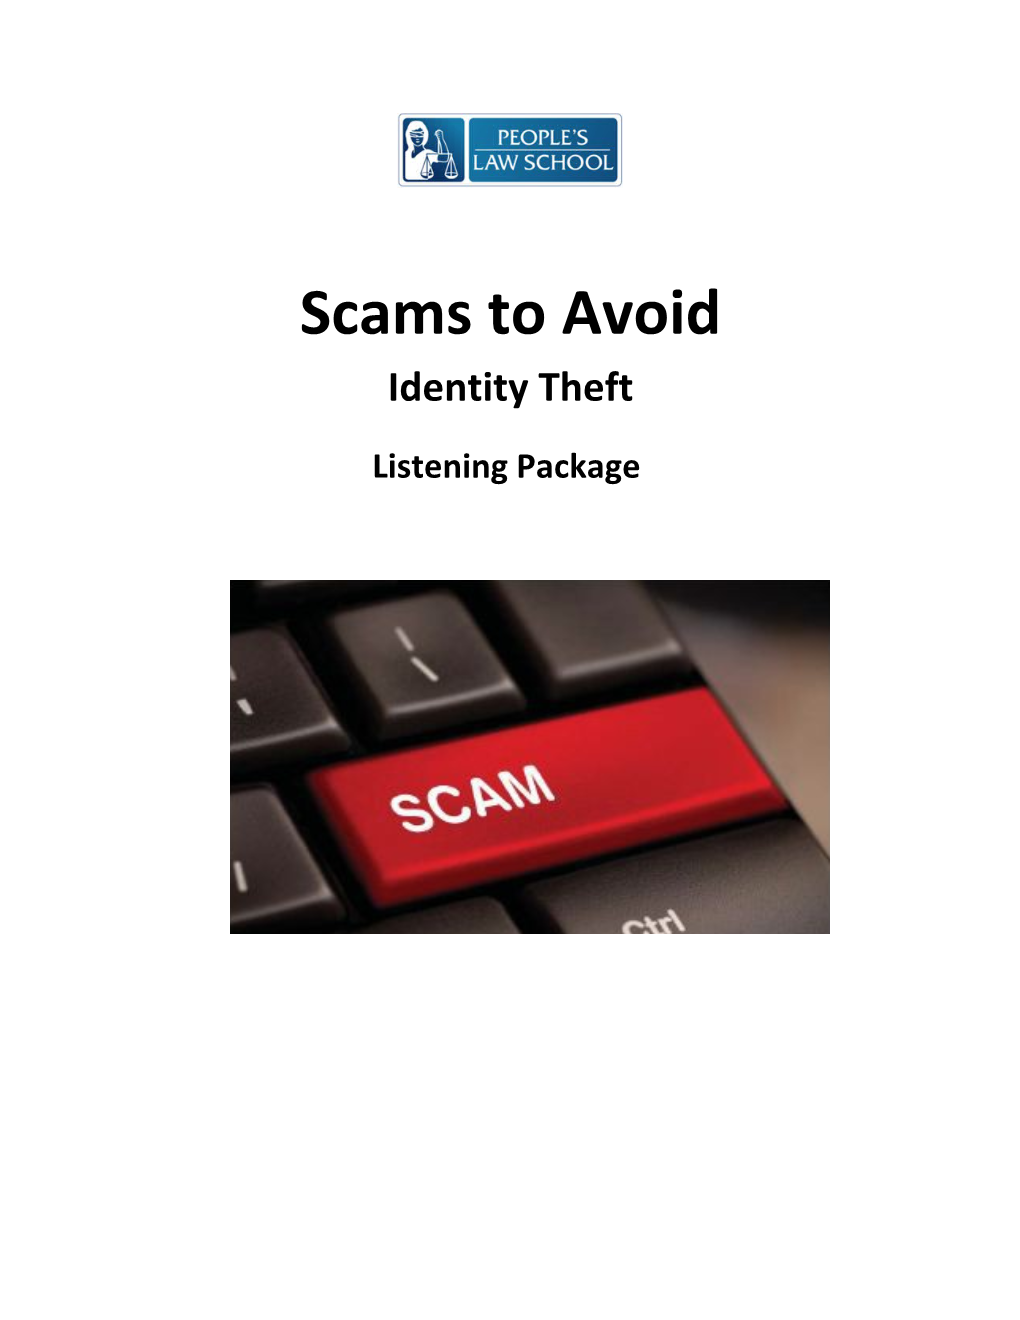 Scams to Avoid: Identity Theft